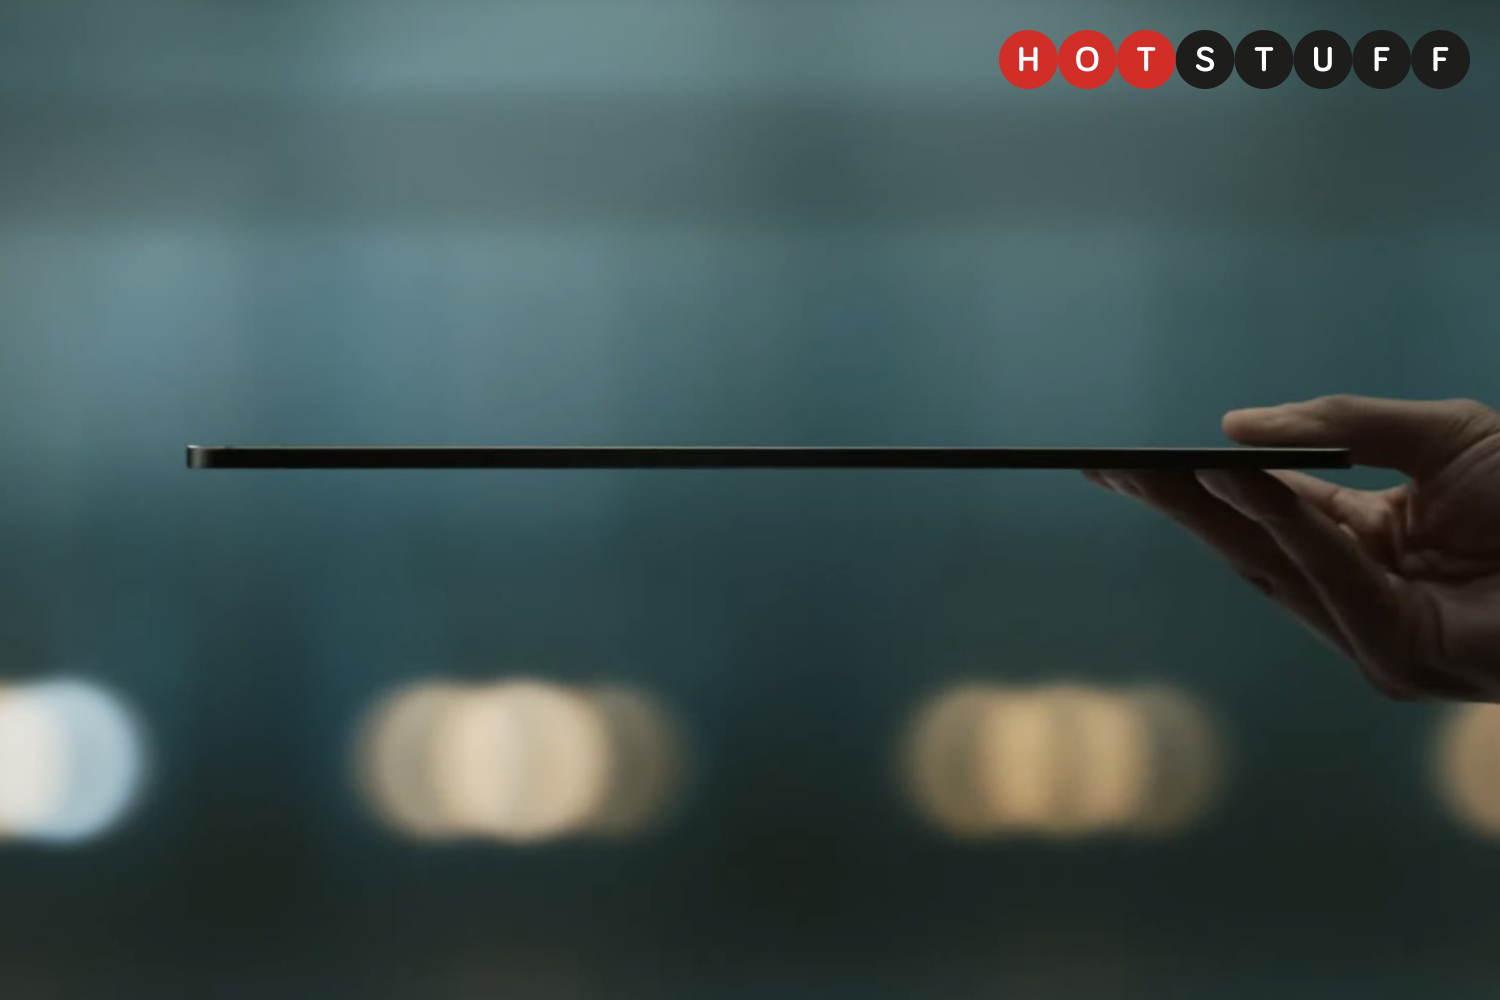 This new iPad Pro is thinner than the iPod Nano and the best performing